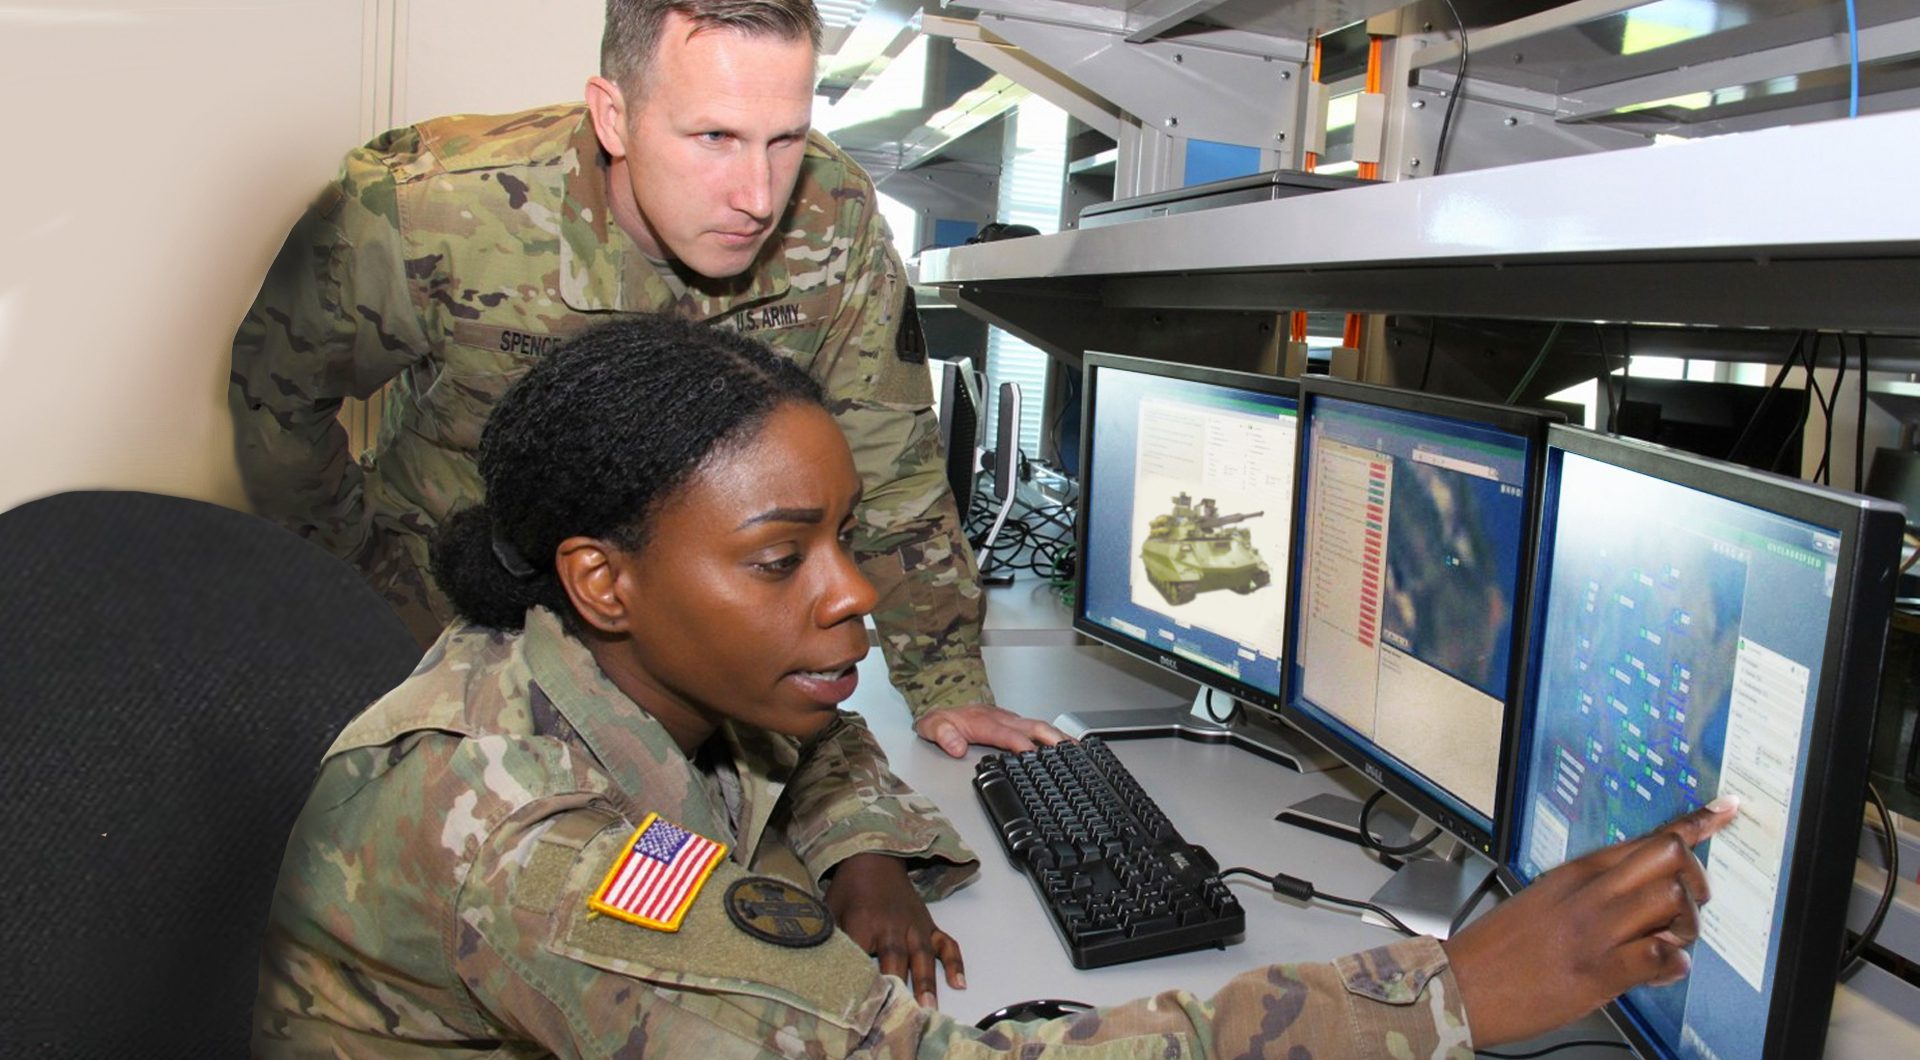 Two US Army soldiers looking at computer monitors showing images of robotic combat vehicles.